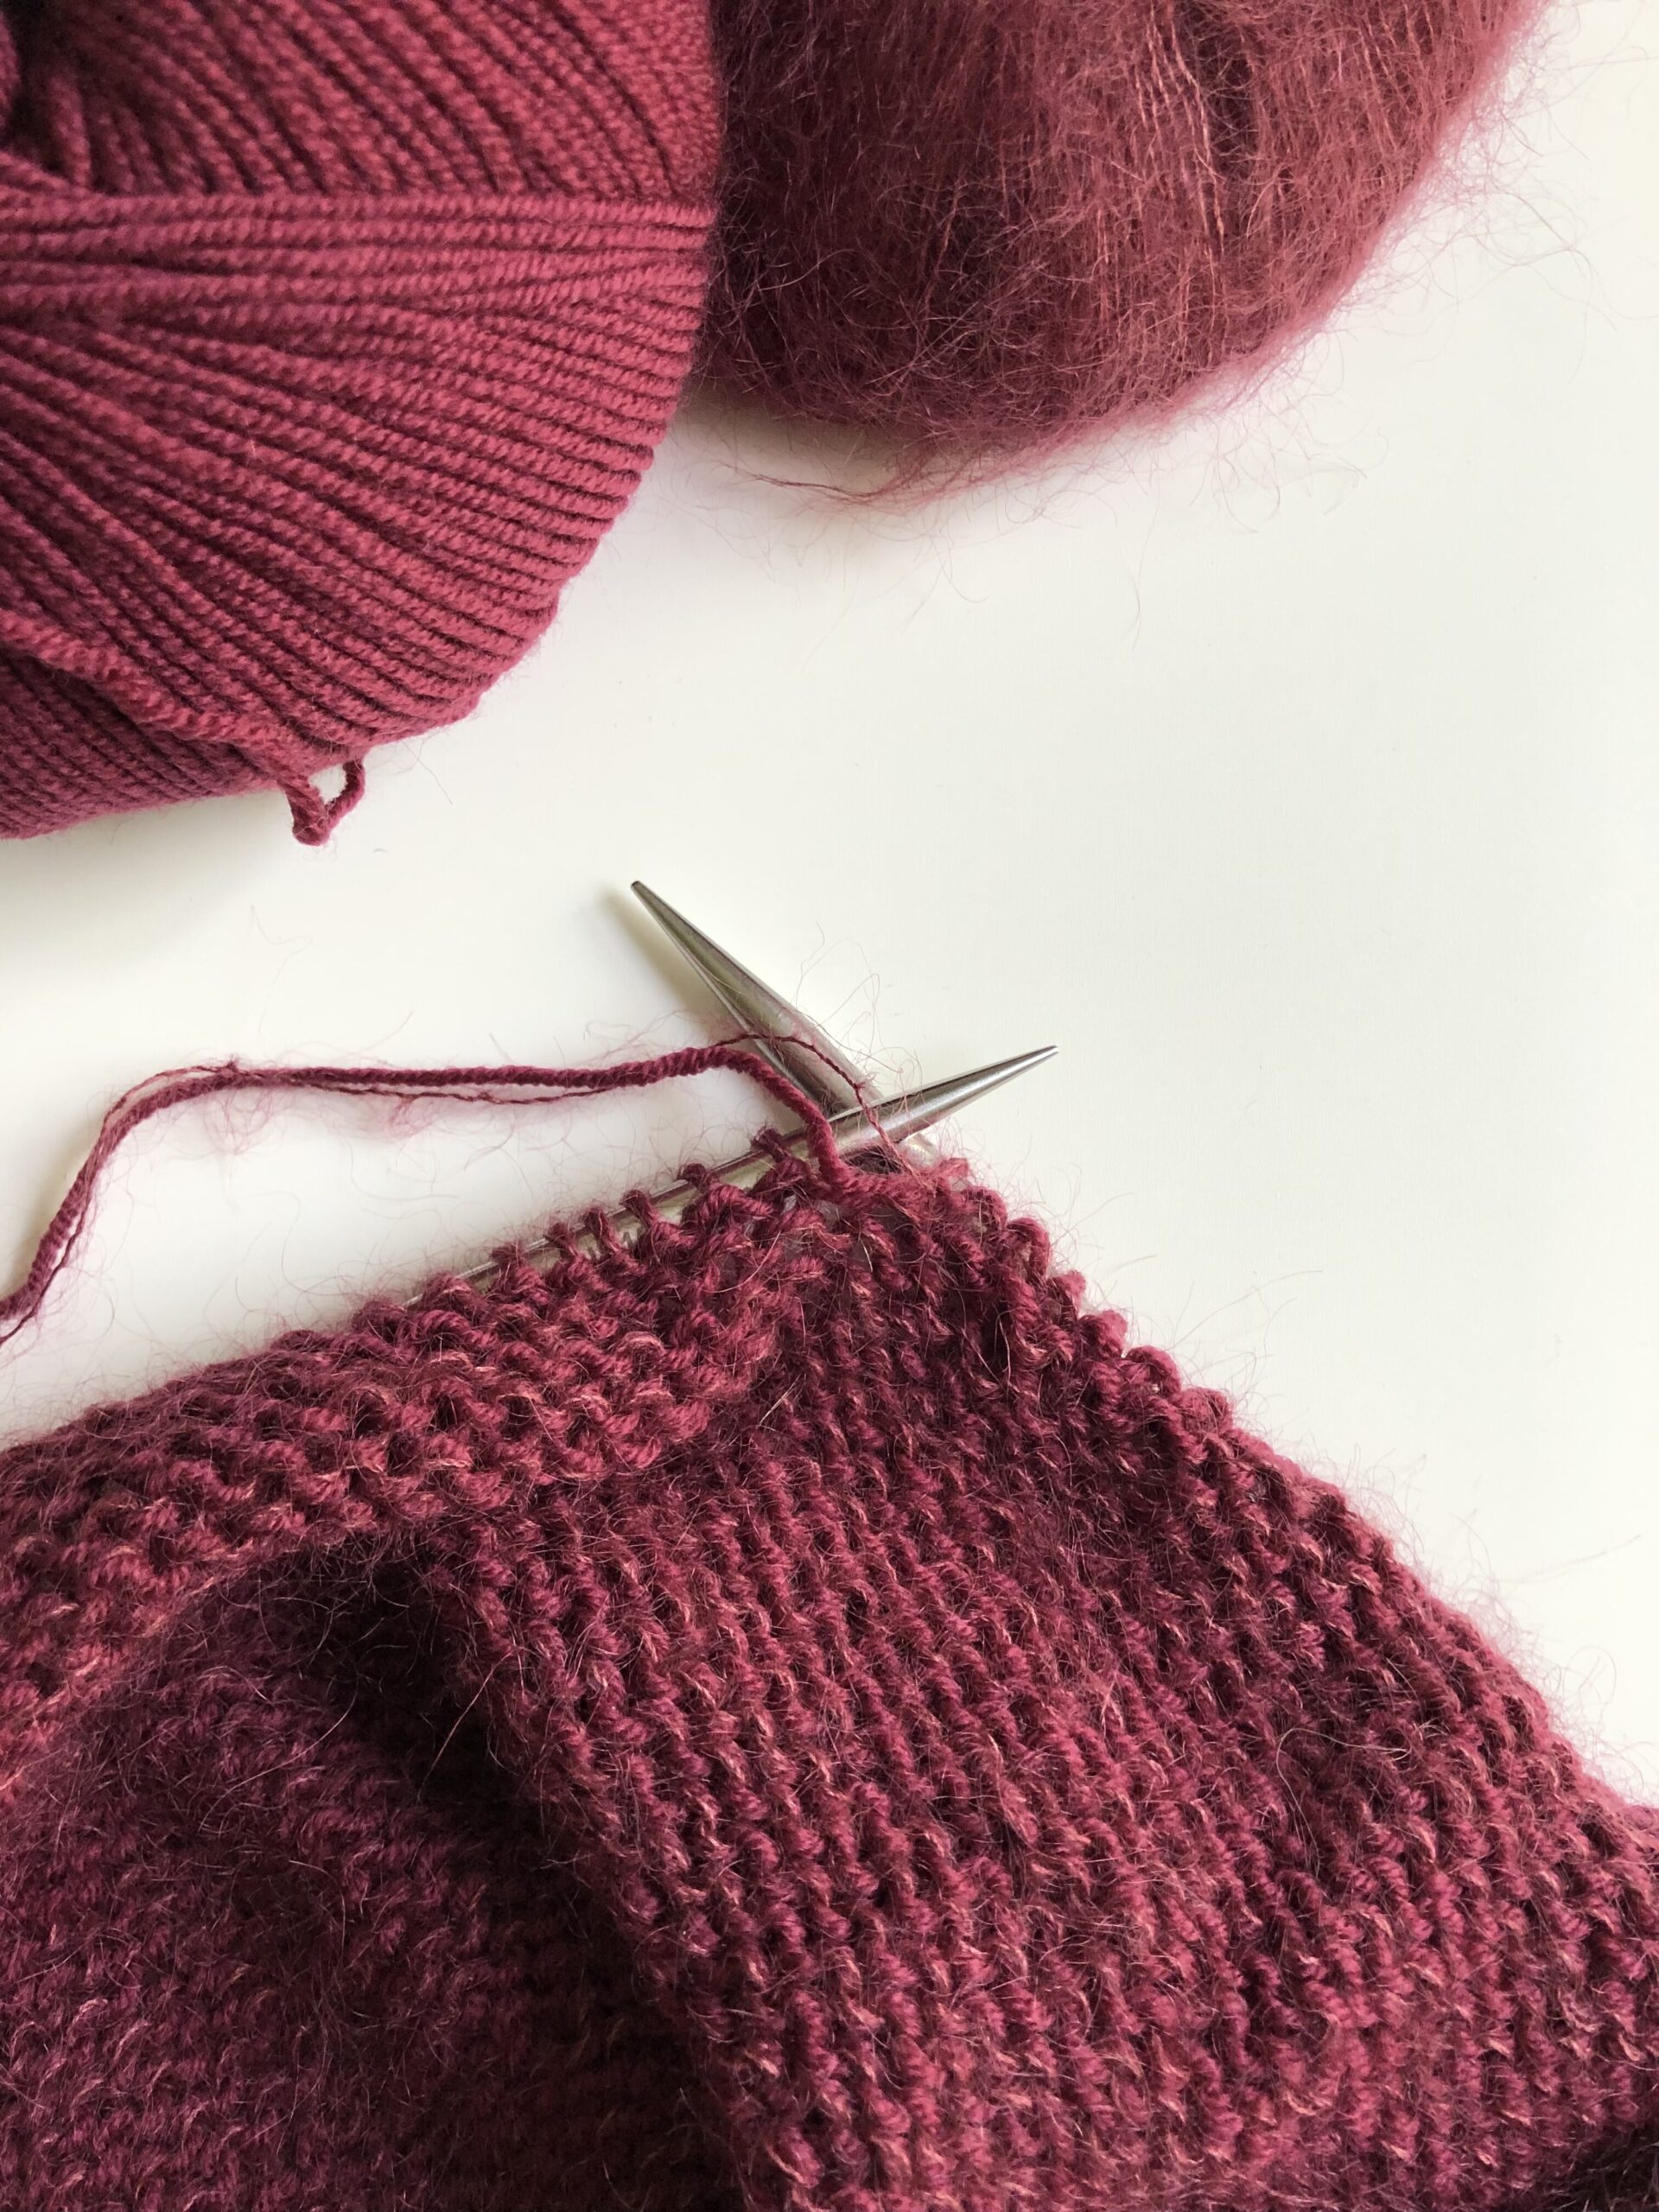 Combined Continental Knitting for Hand Pain